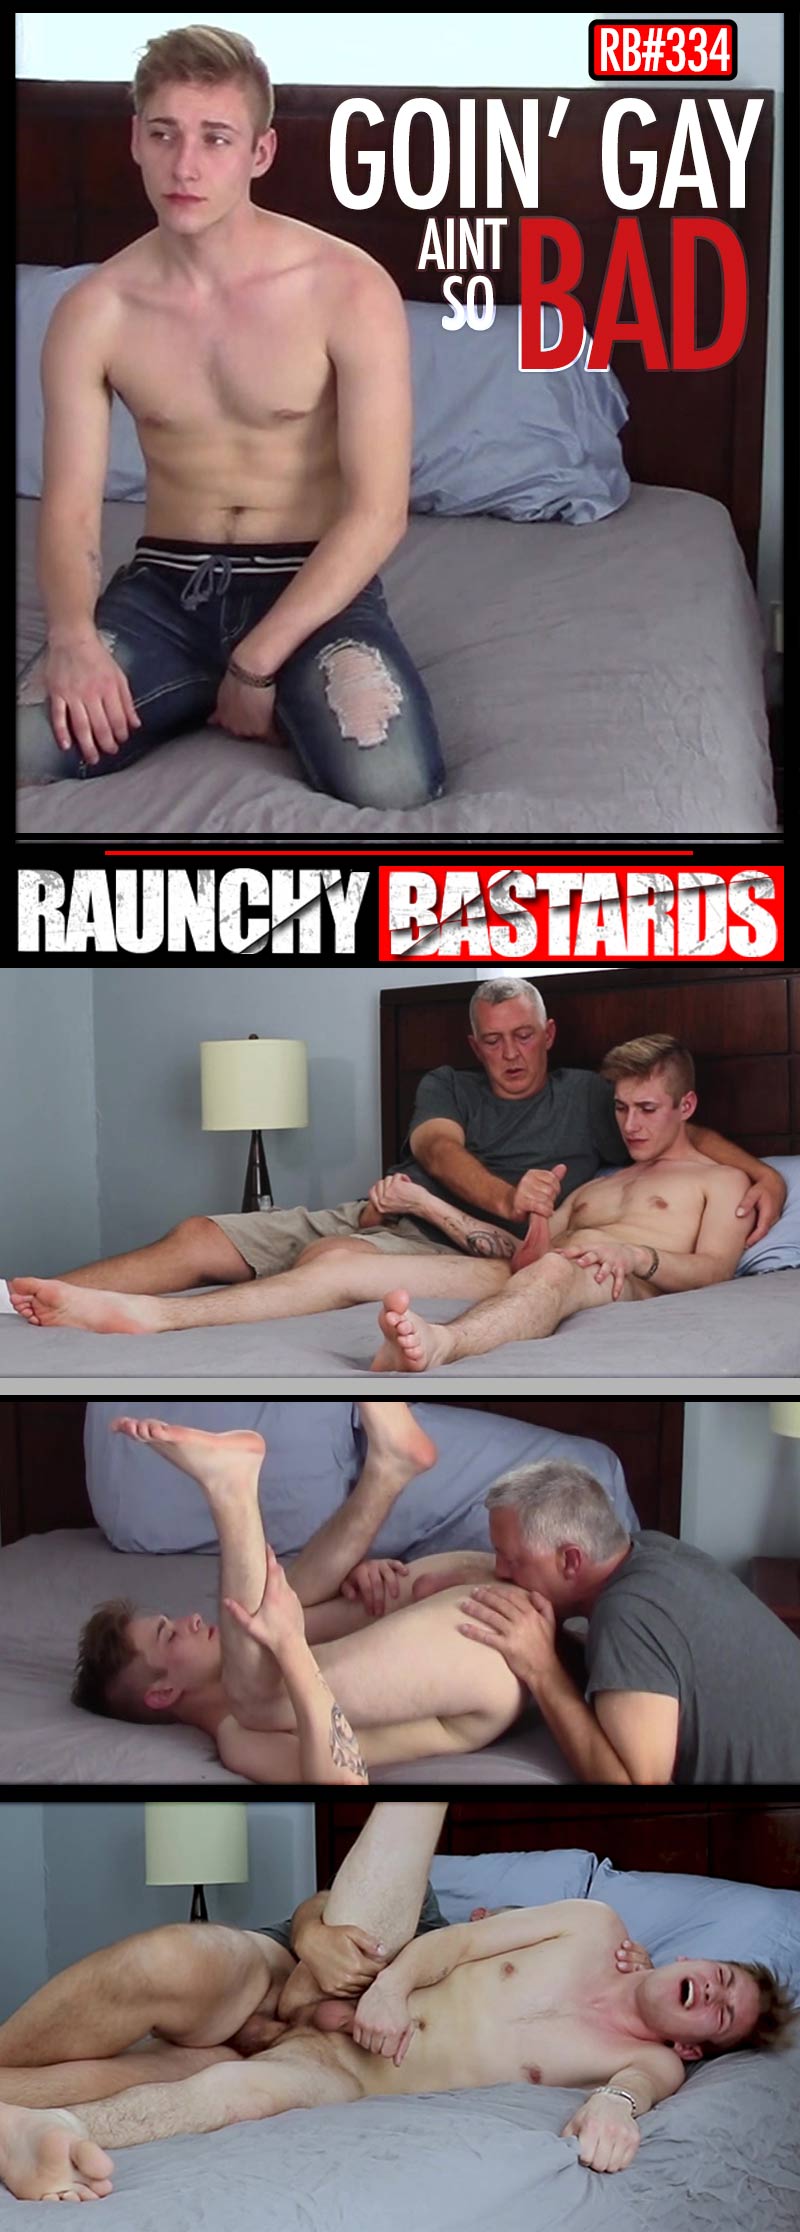 Episode #334: Alek Page Bottoms For Clay in 'Goin' Gay Ain't So Bad' at Raunch Bastards